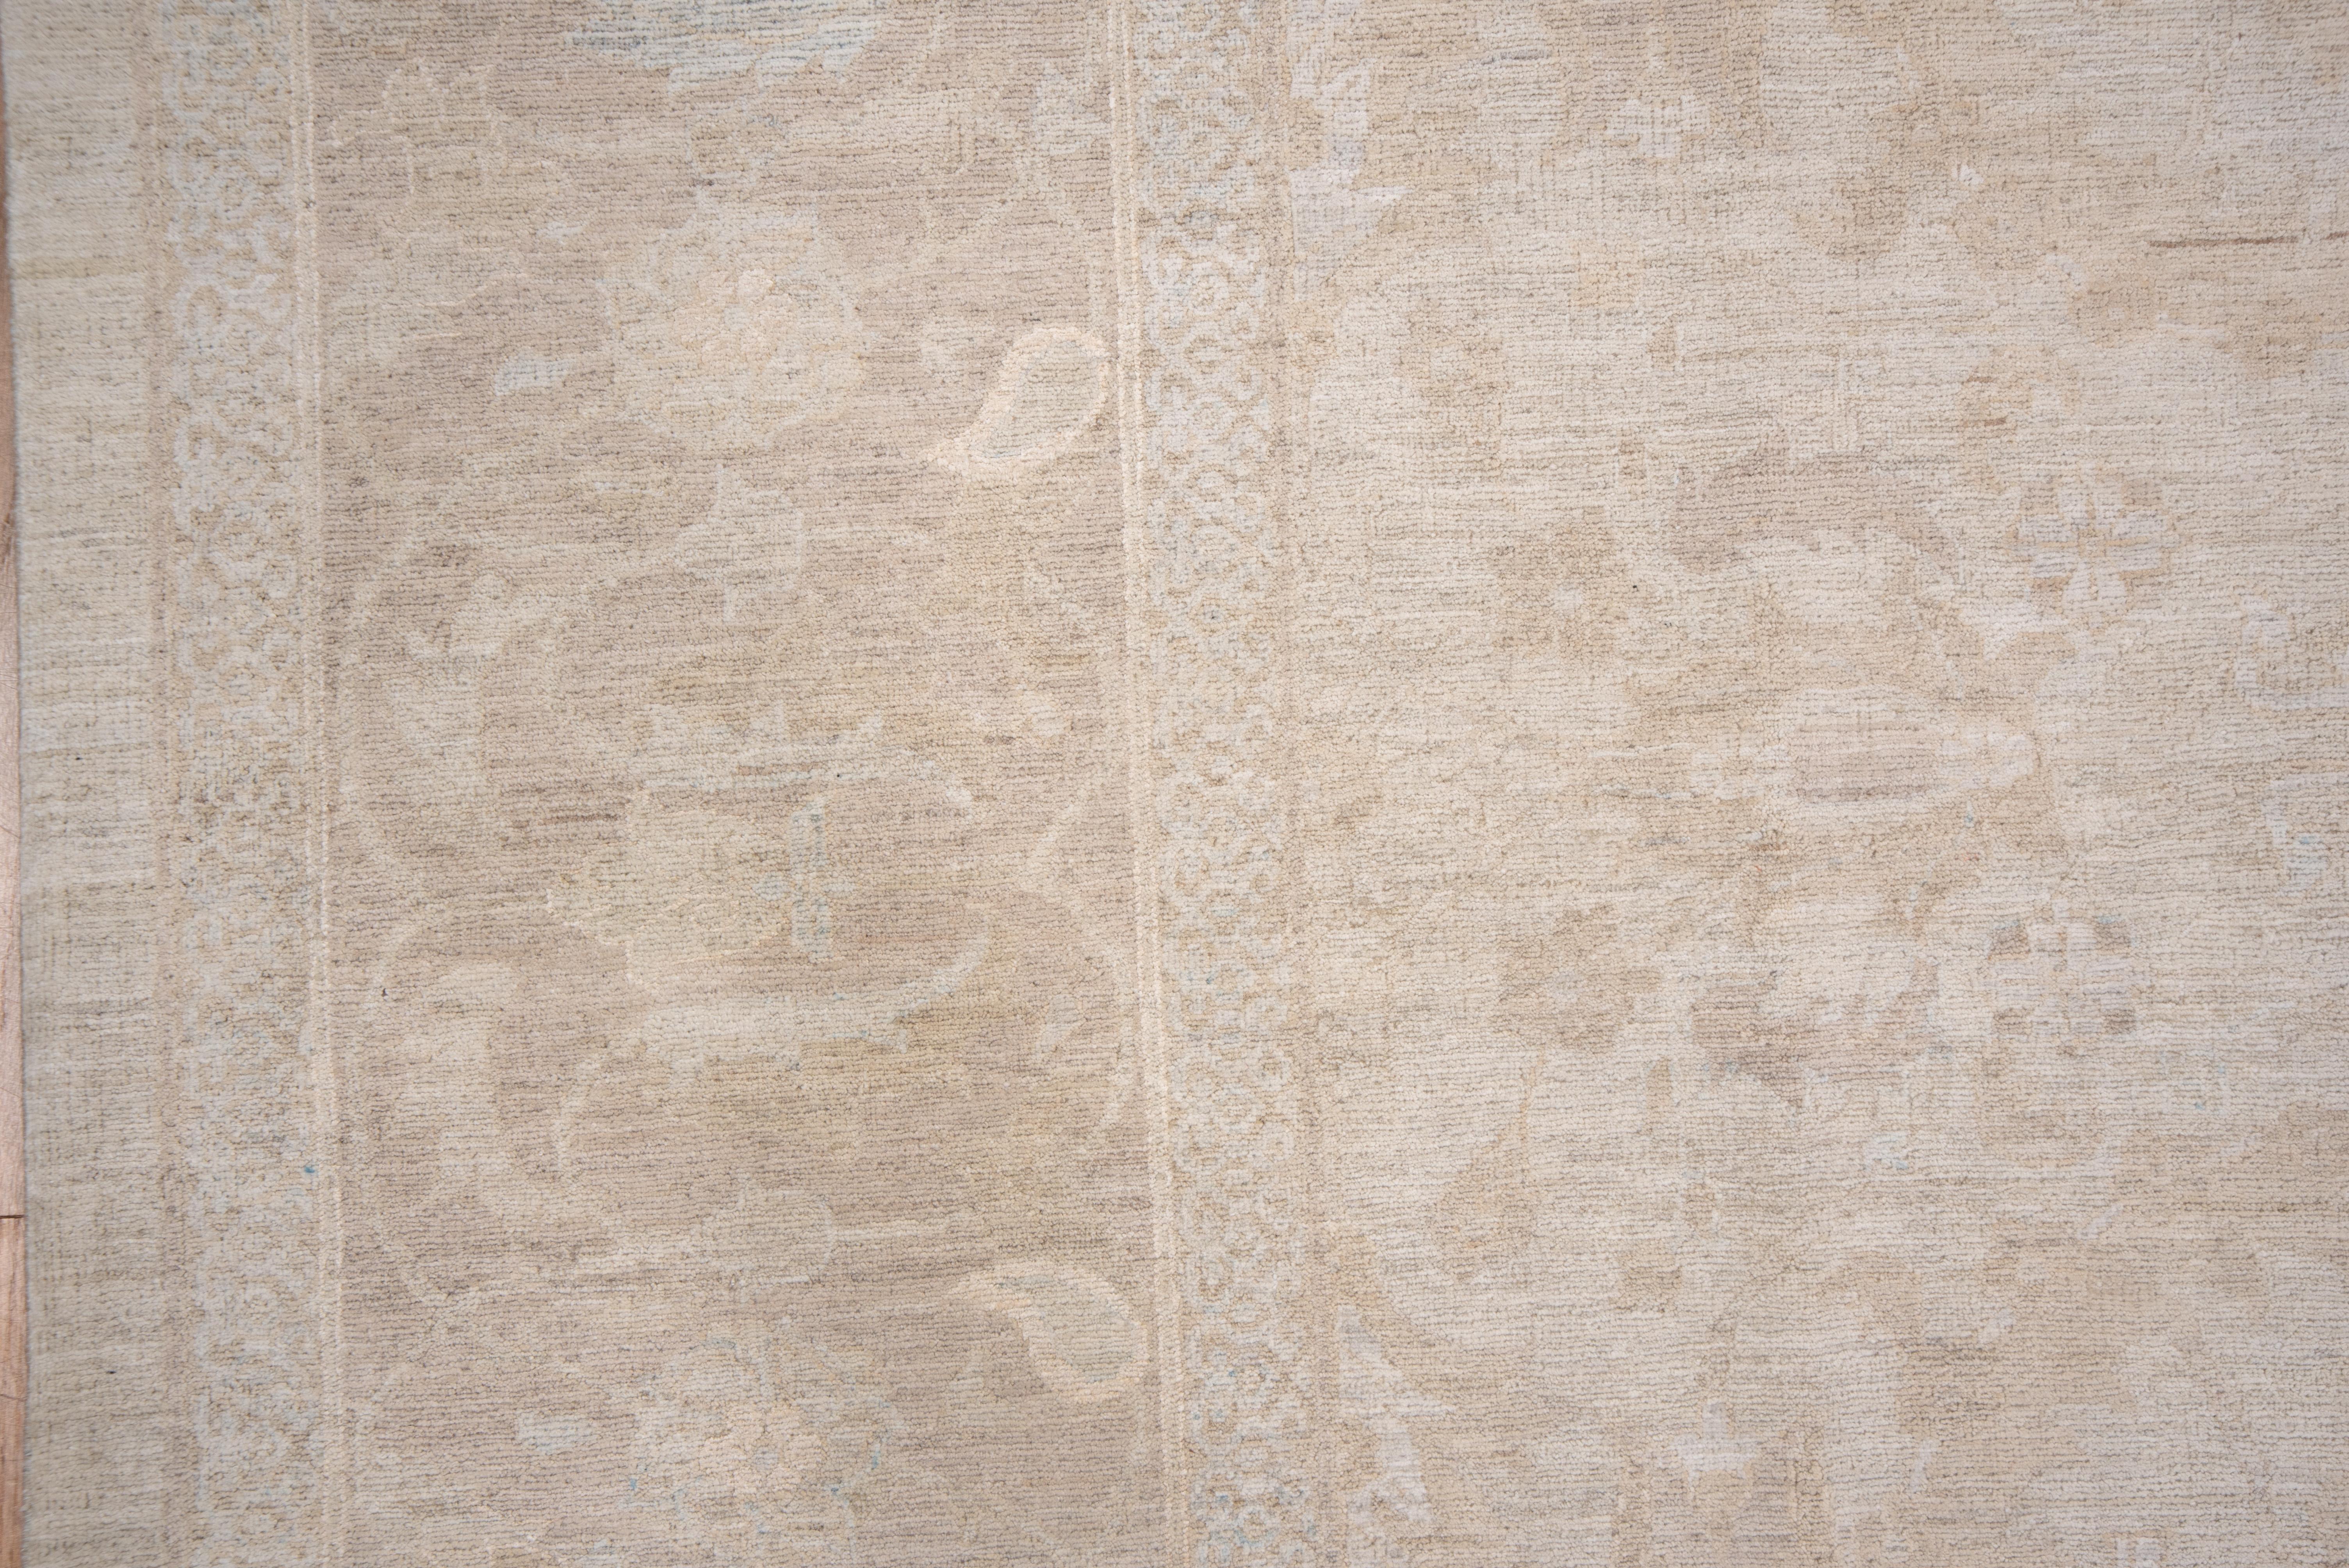 This as new condition, wool and silk contemporary carpet has a shadow design in tones of off white and pale tan of speckles, 